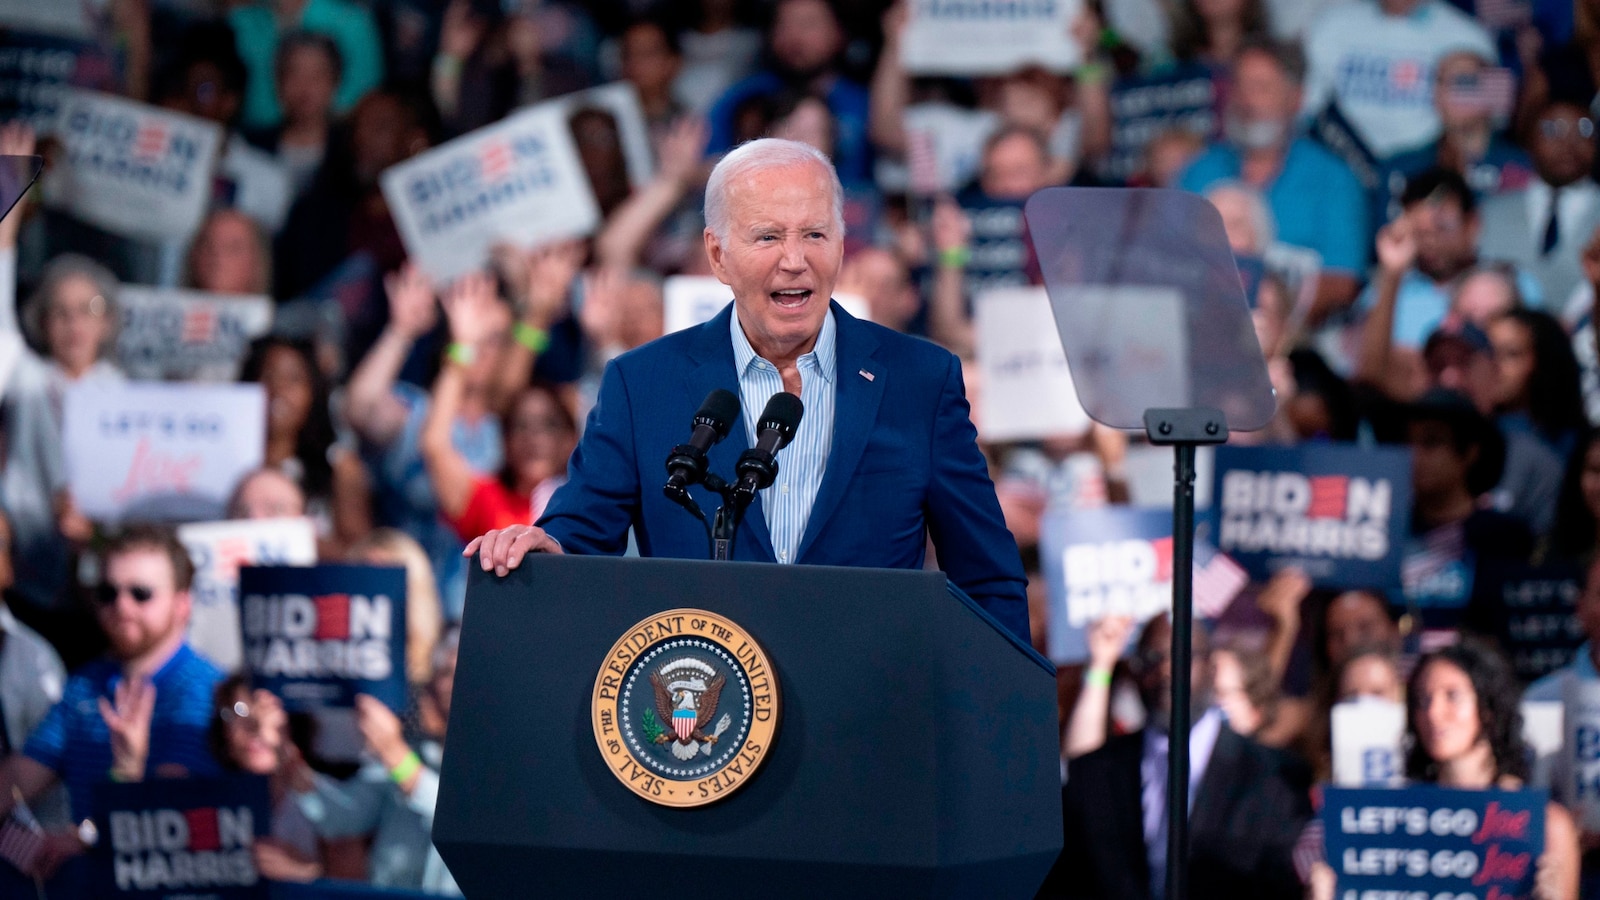 As questions swirl about fitness for office, Biden campaign outraised Trump in June fundraising haul